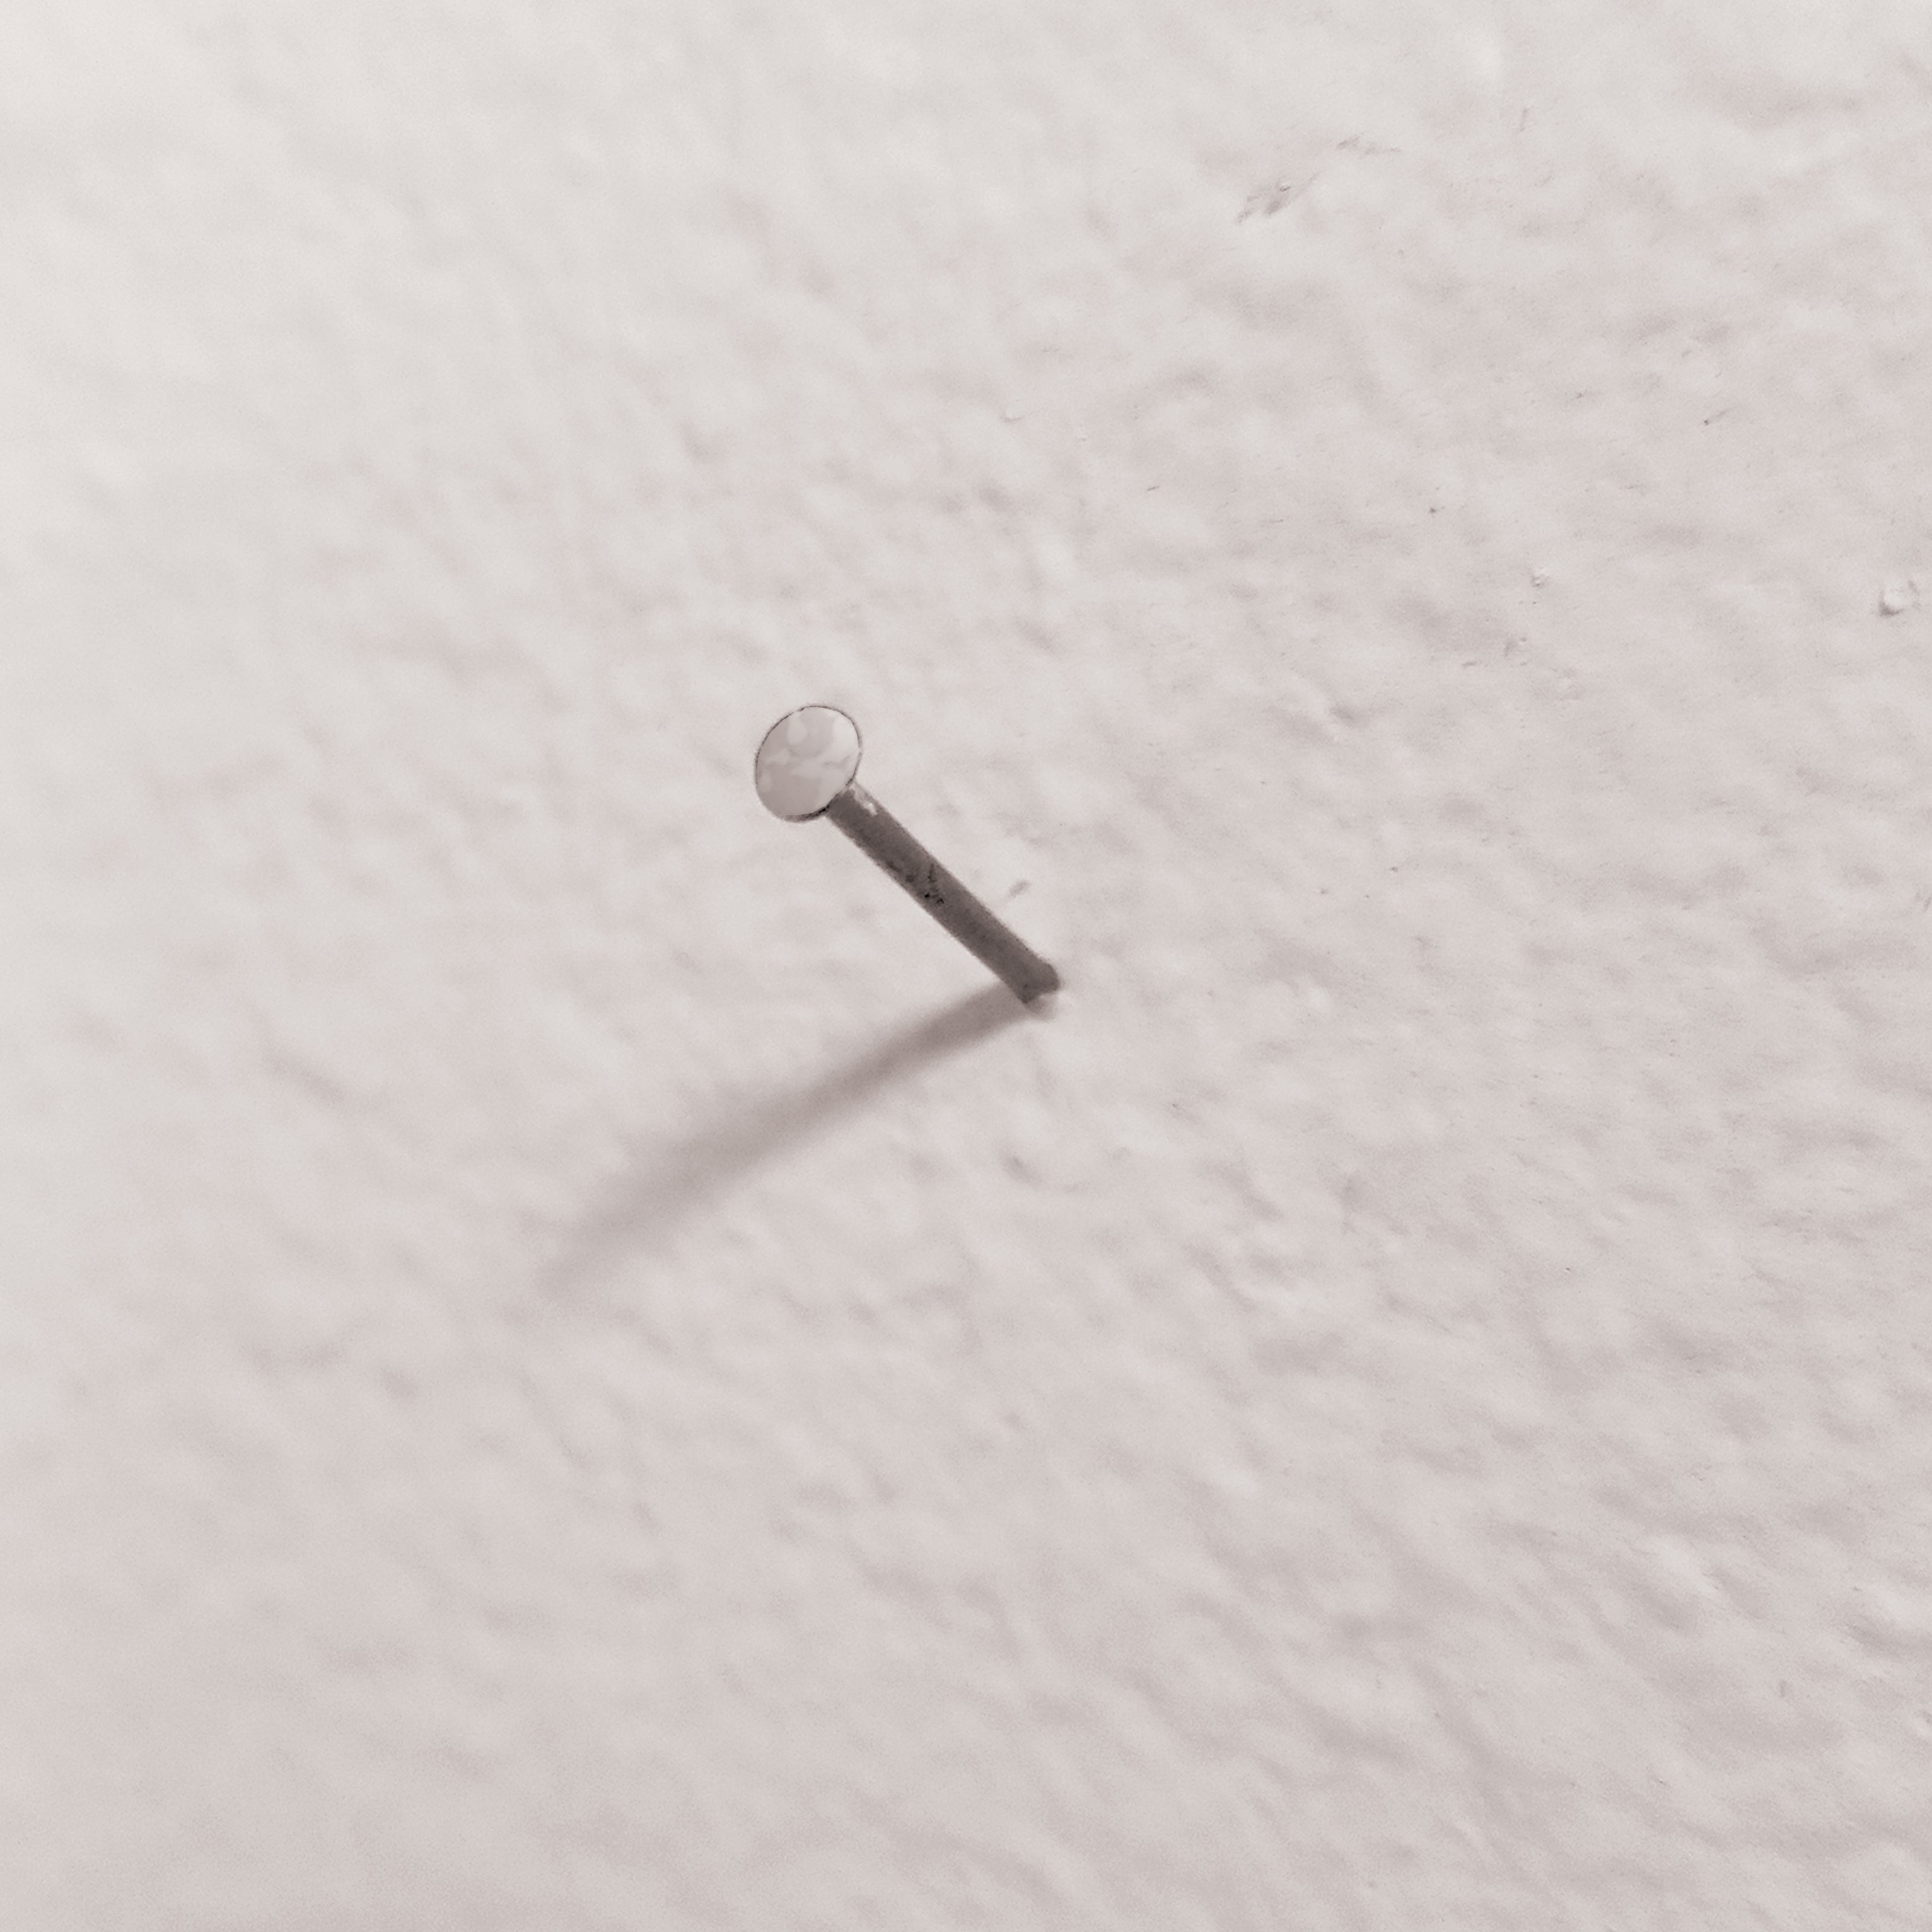 A small nail in a wall